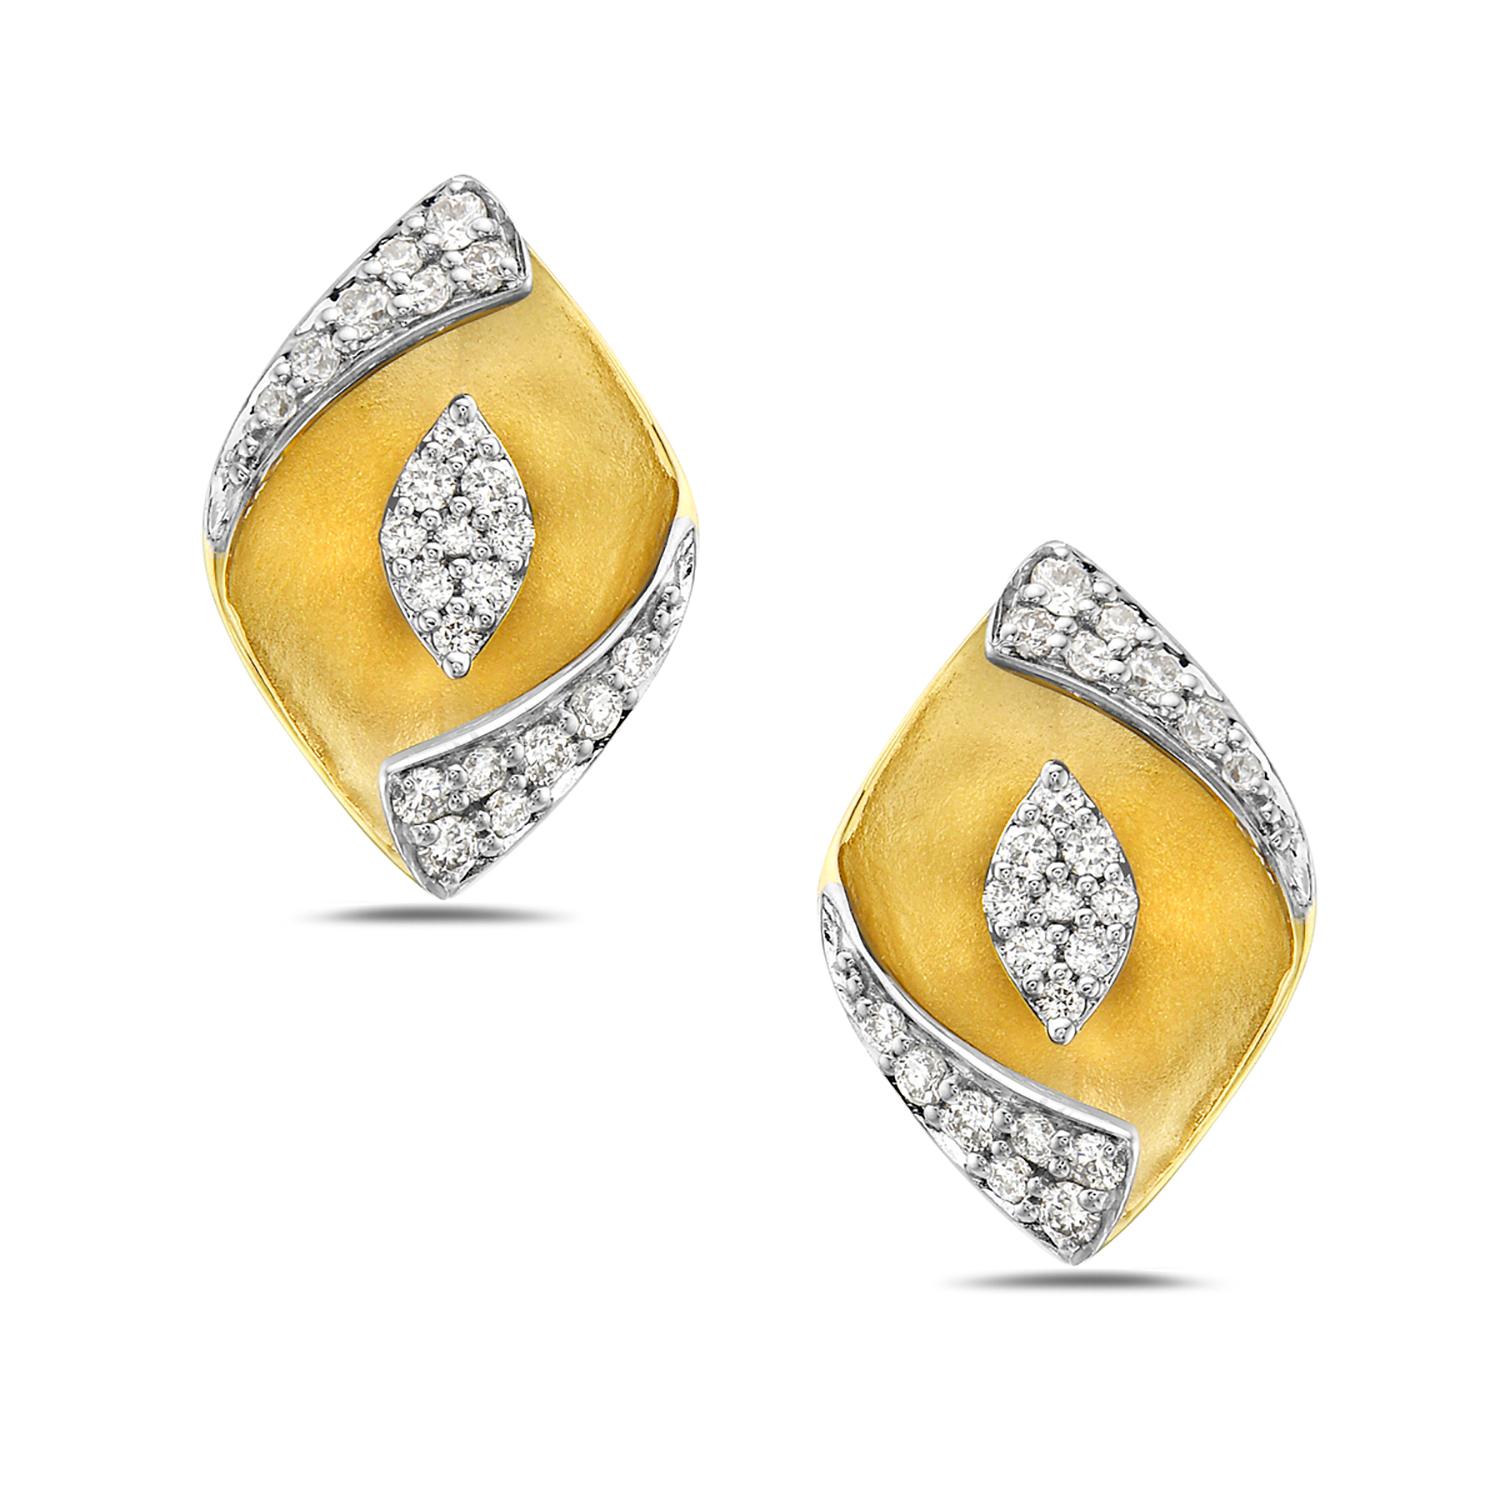 Folded Paper Shaped Stud Earrings with Diamonds Made in 14k Yellow Gold In New Condition For Sale In New York, NY